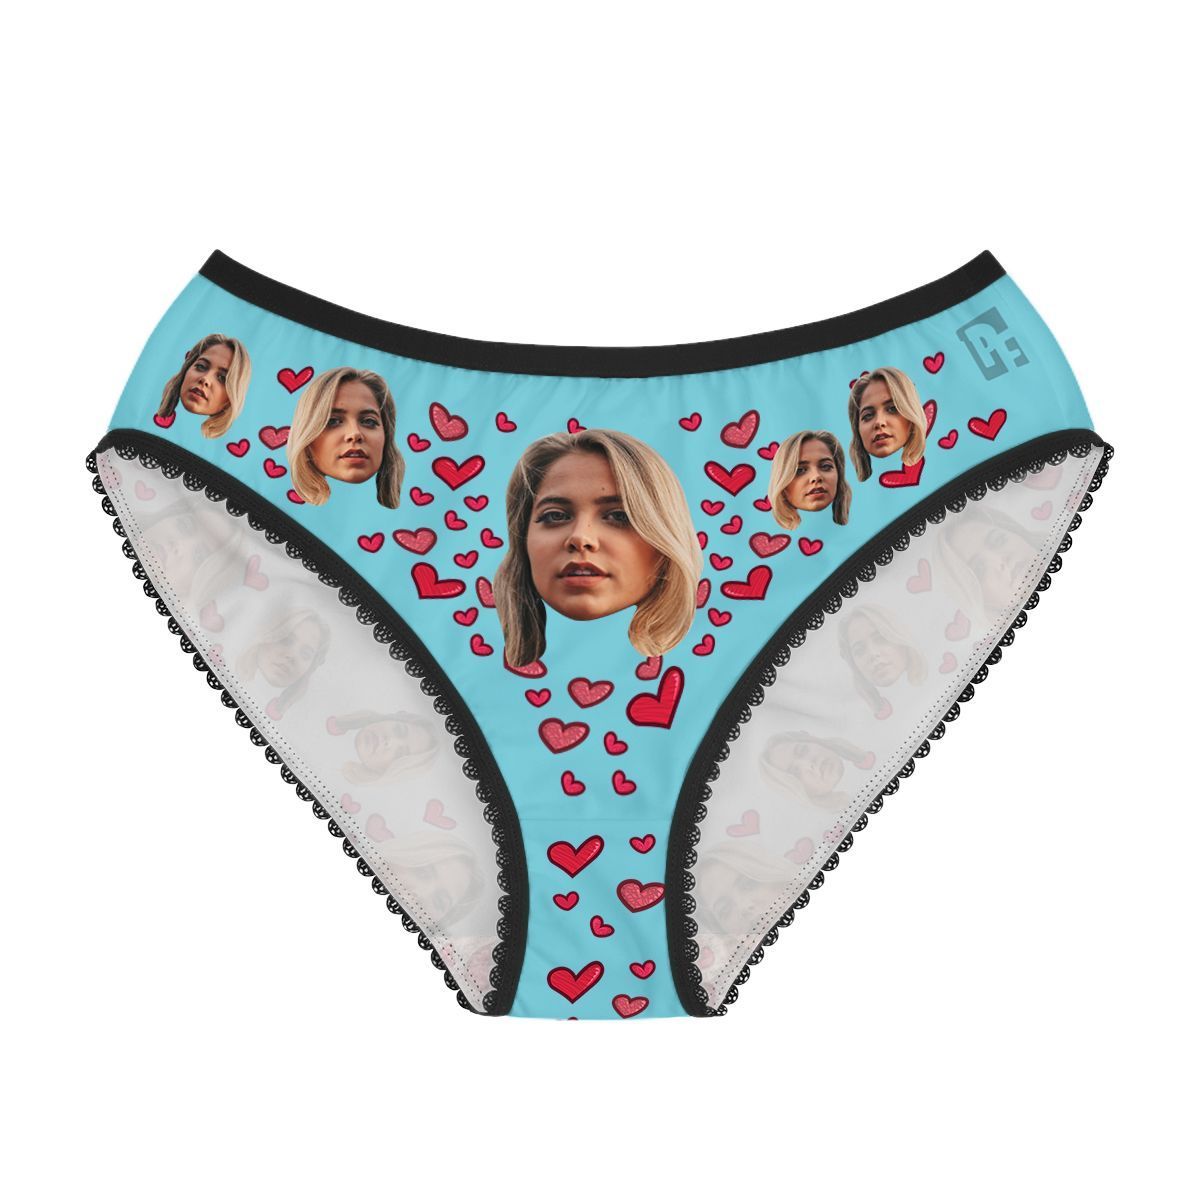 Mint Heart women's underwear briefs personalized with photo printed on them